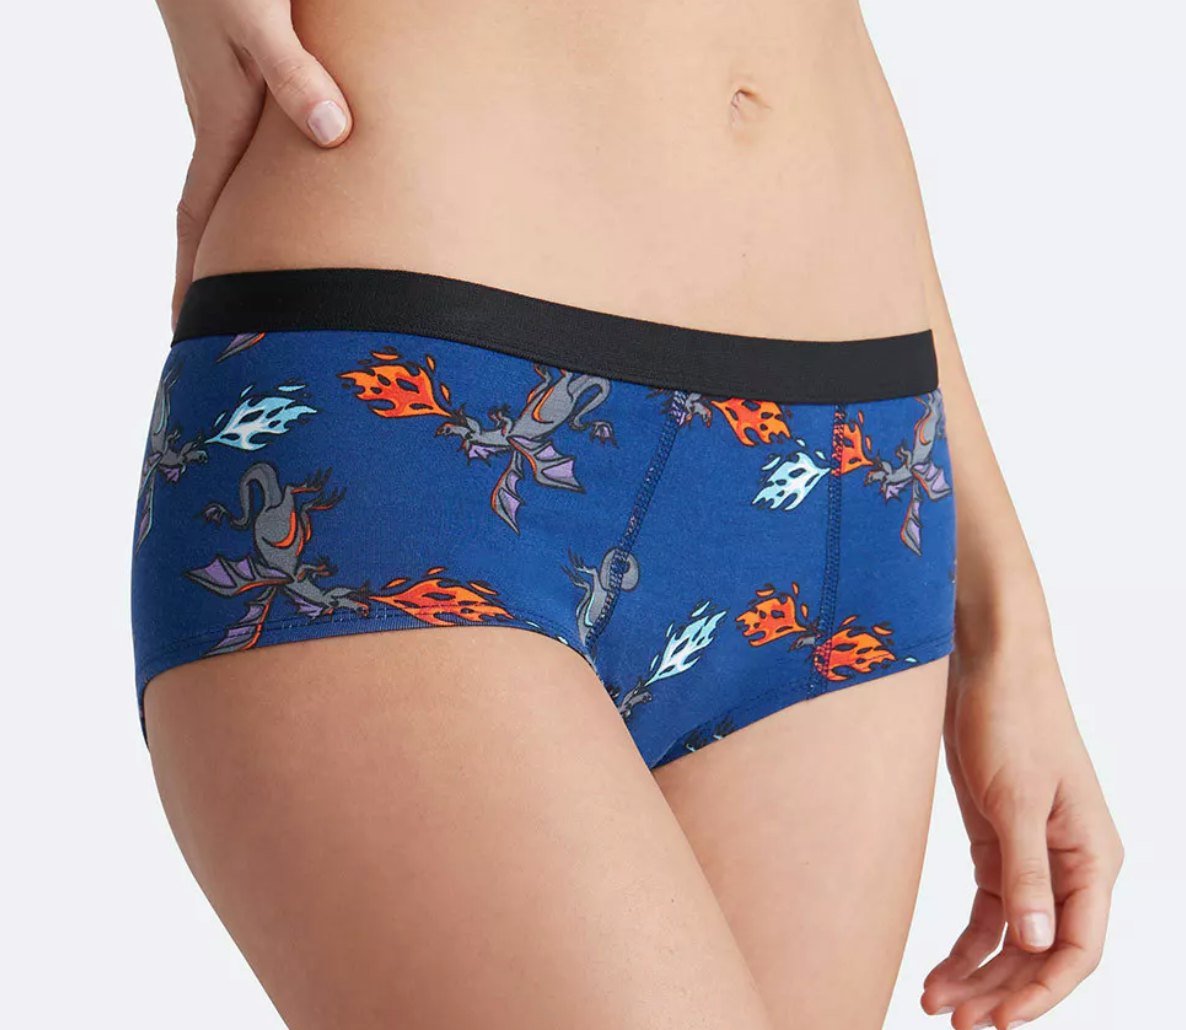 Fire or Ice? MeUndies Releases Game of Thrones-Inspired Dragon Print  Underwear - The Manual